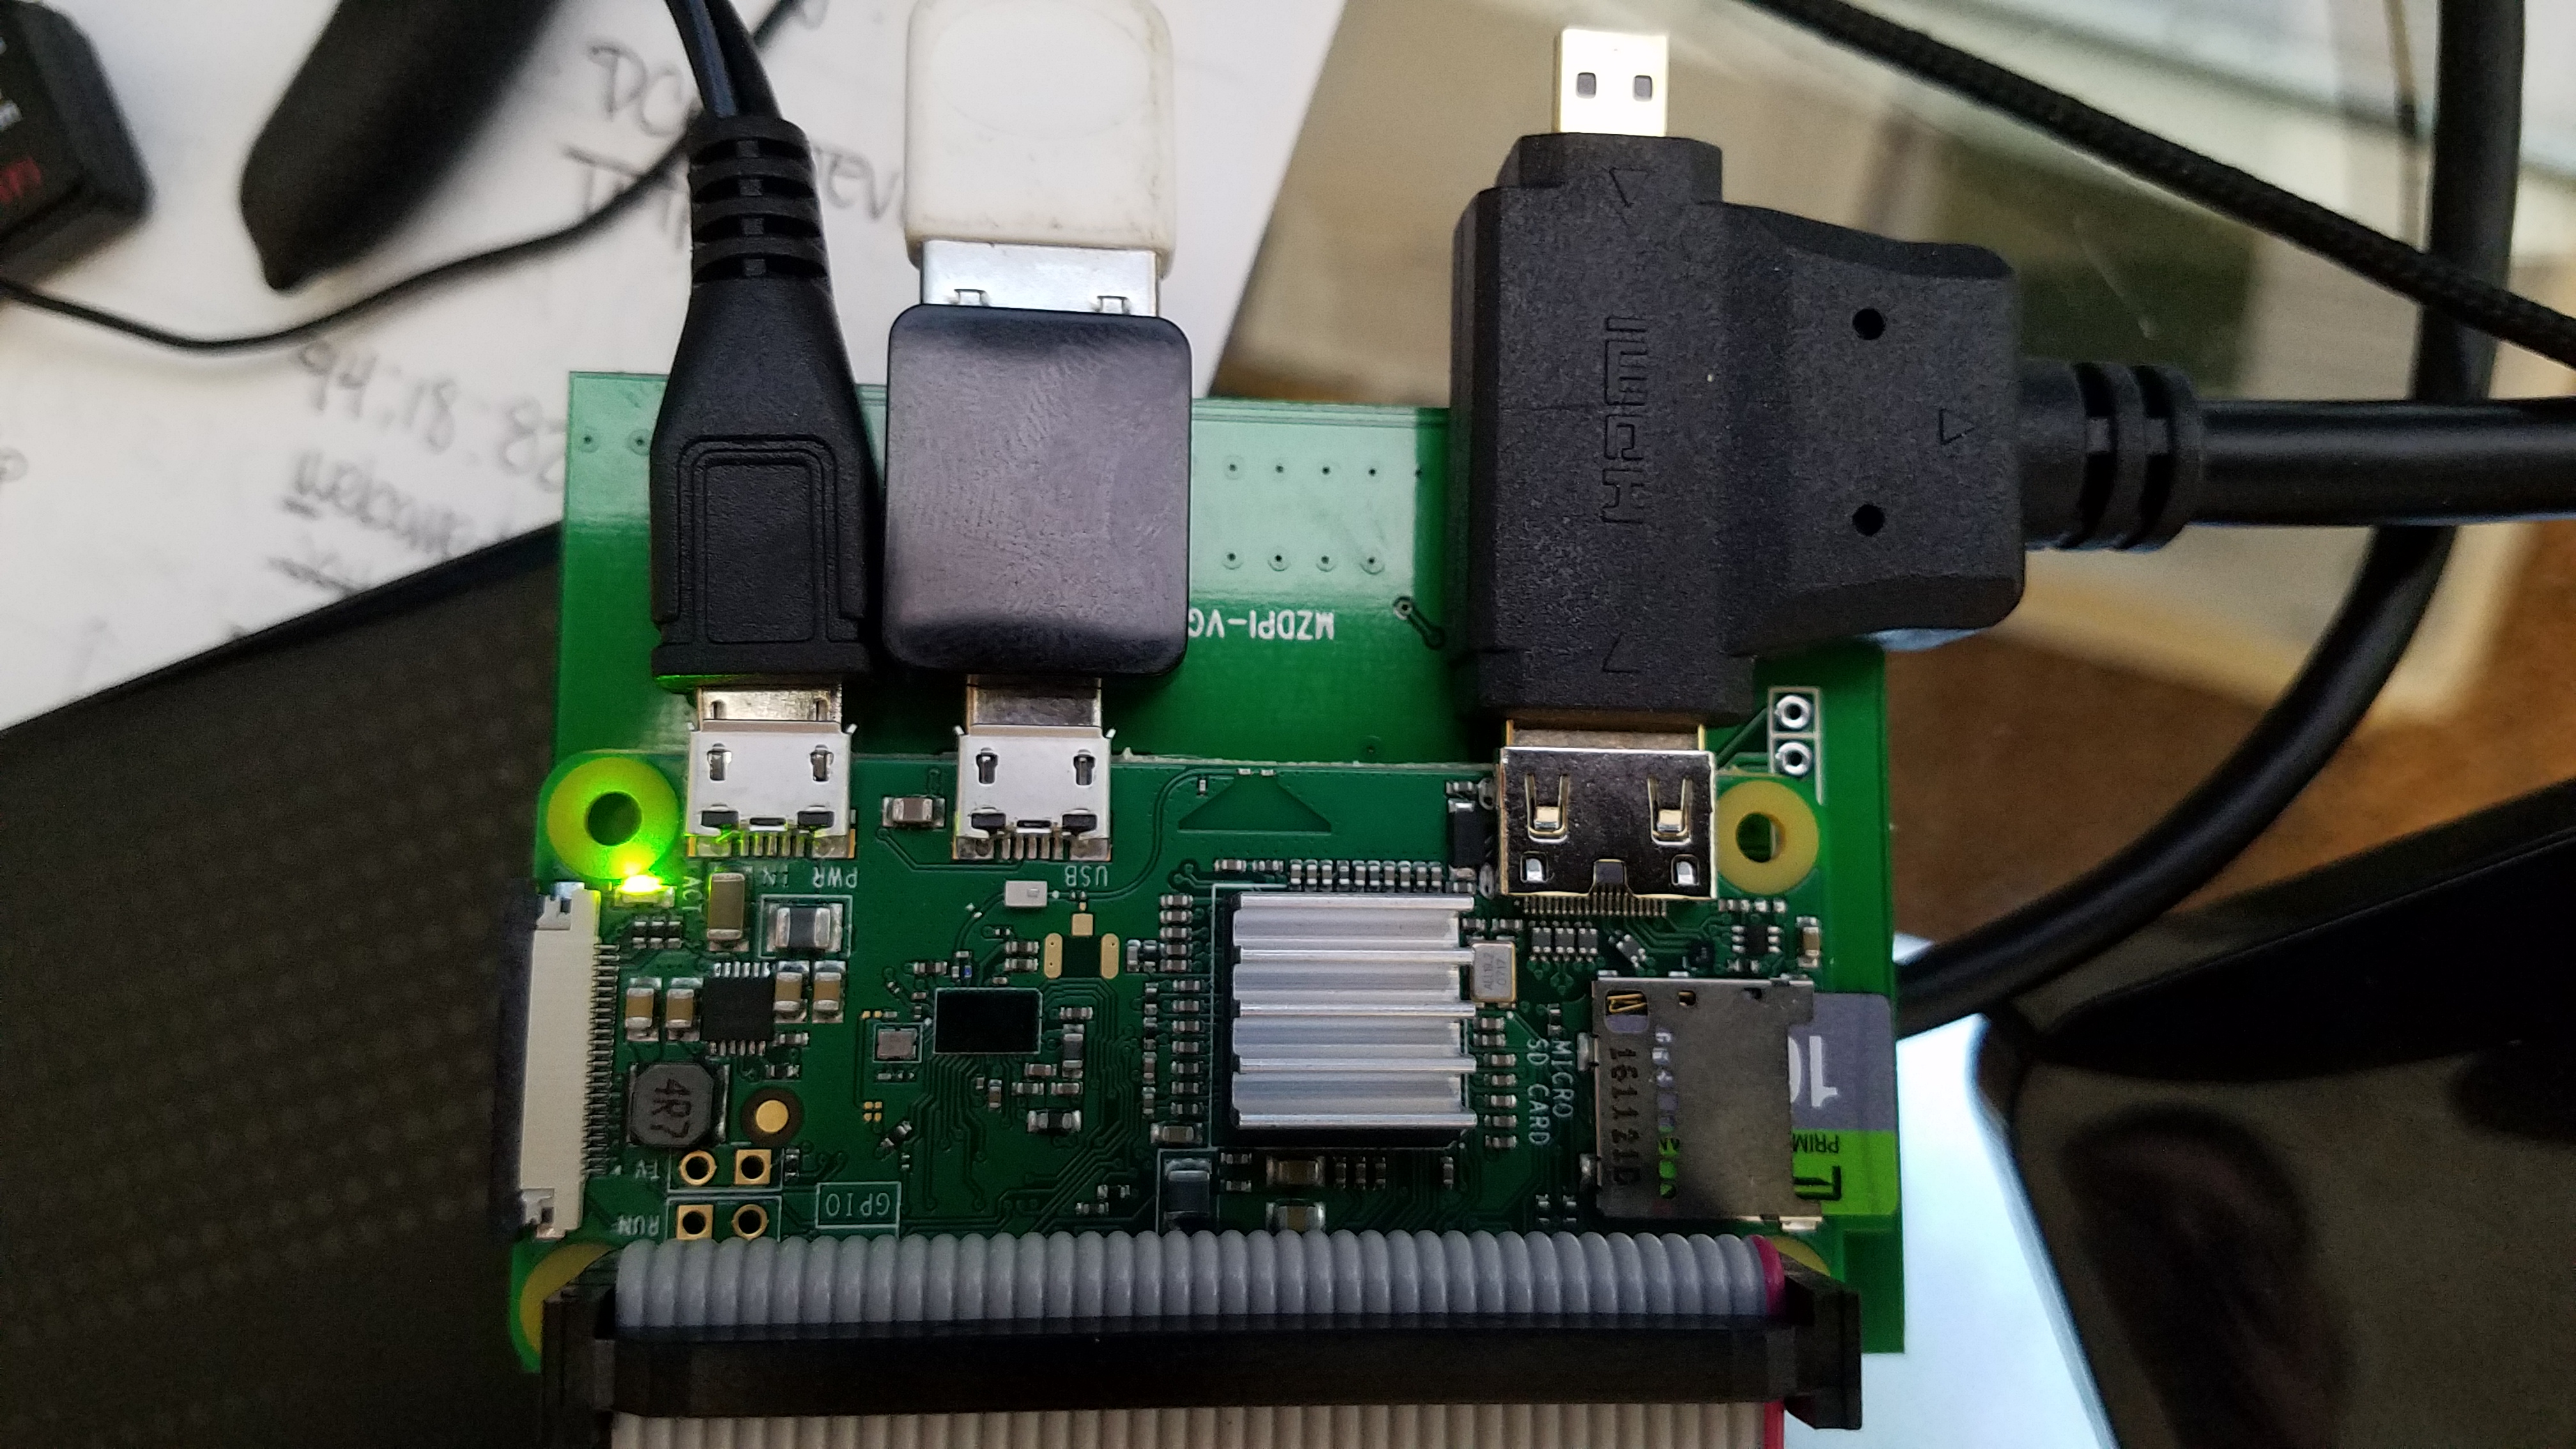 Raspberry Pi Zero W with GPIO header, TFT screen, USB and HDMI adapters connected